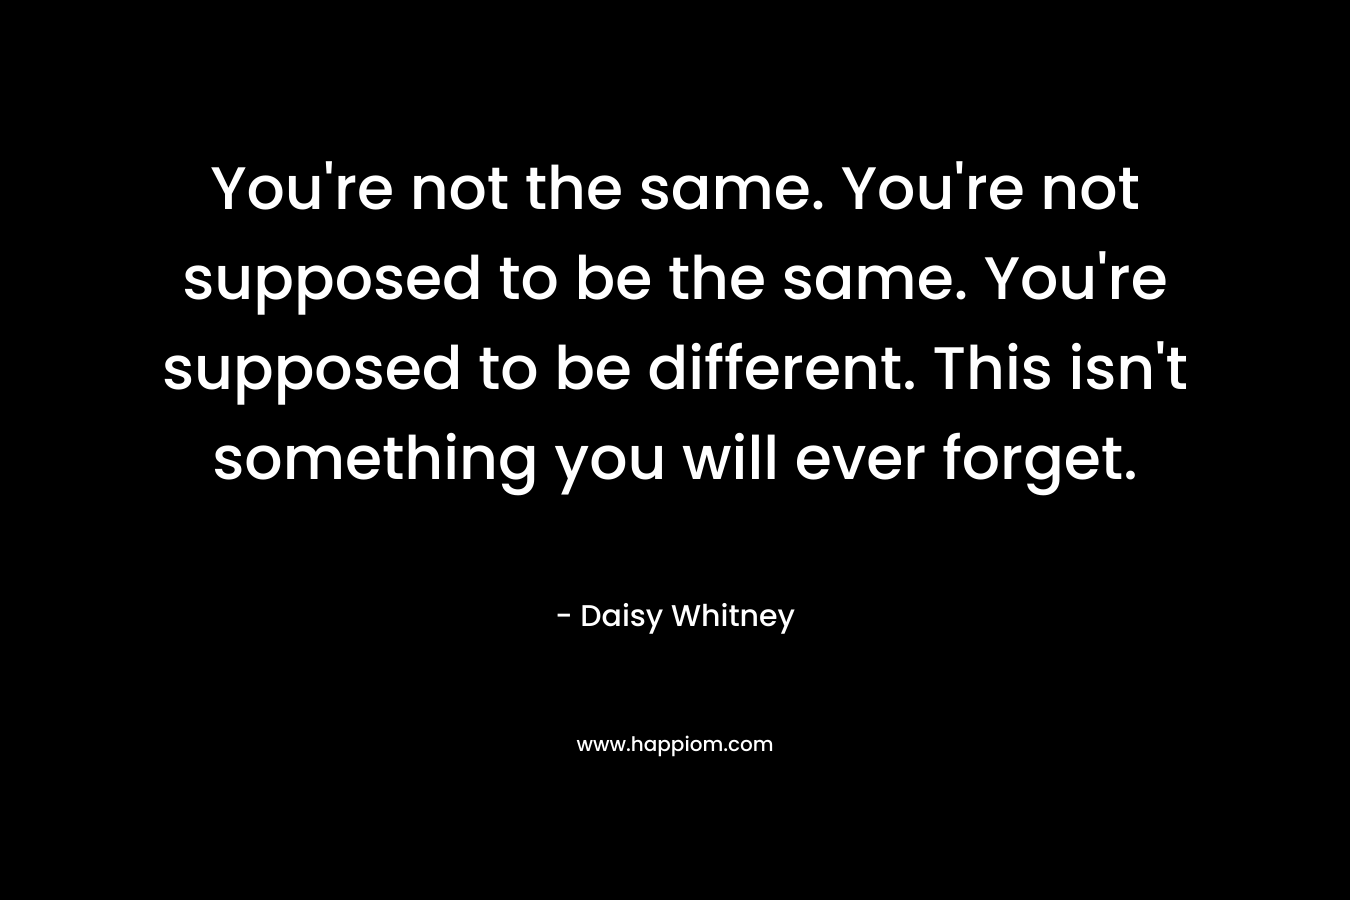 You’re not the same. You’re not supposed to be the same. You’re supposed to be different. This isn’t something you will ever forget. – Daisy Whitney